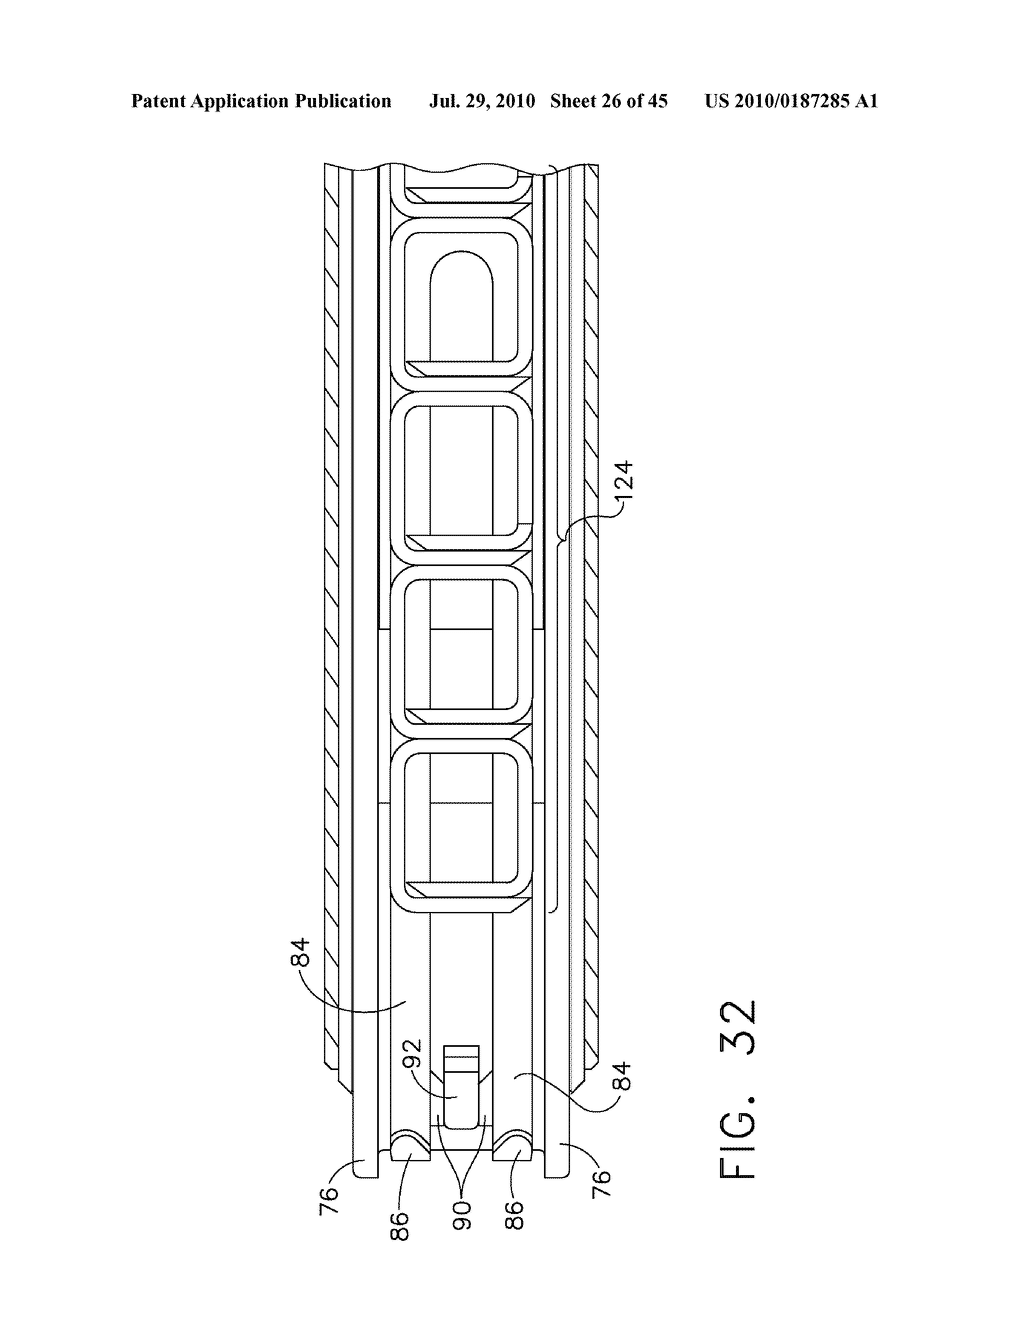 SURGICAL STAPLER FOR APPLYING A LARGE STAPLE THOUGH A SMALL DELIVERY PORT AND A METHOD OF USING THE STAPLER TO SECURE A TISSUE FOLD - diagram, schematic, and image 27